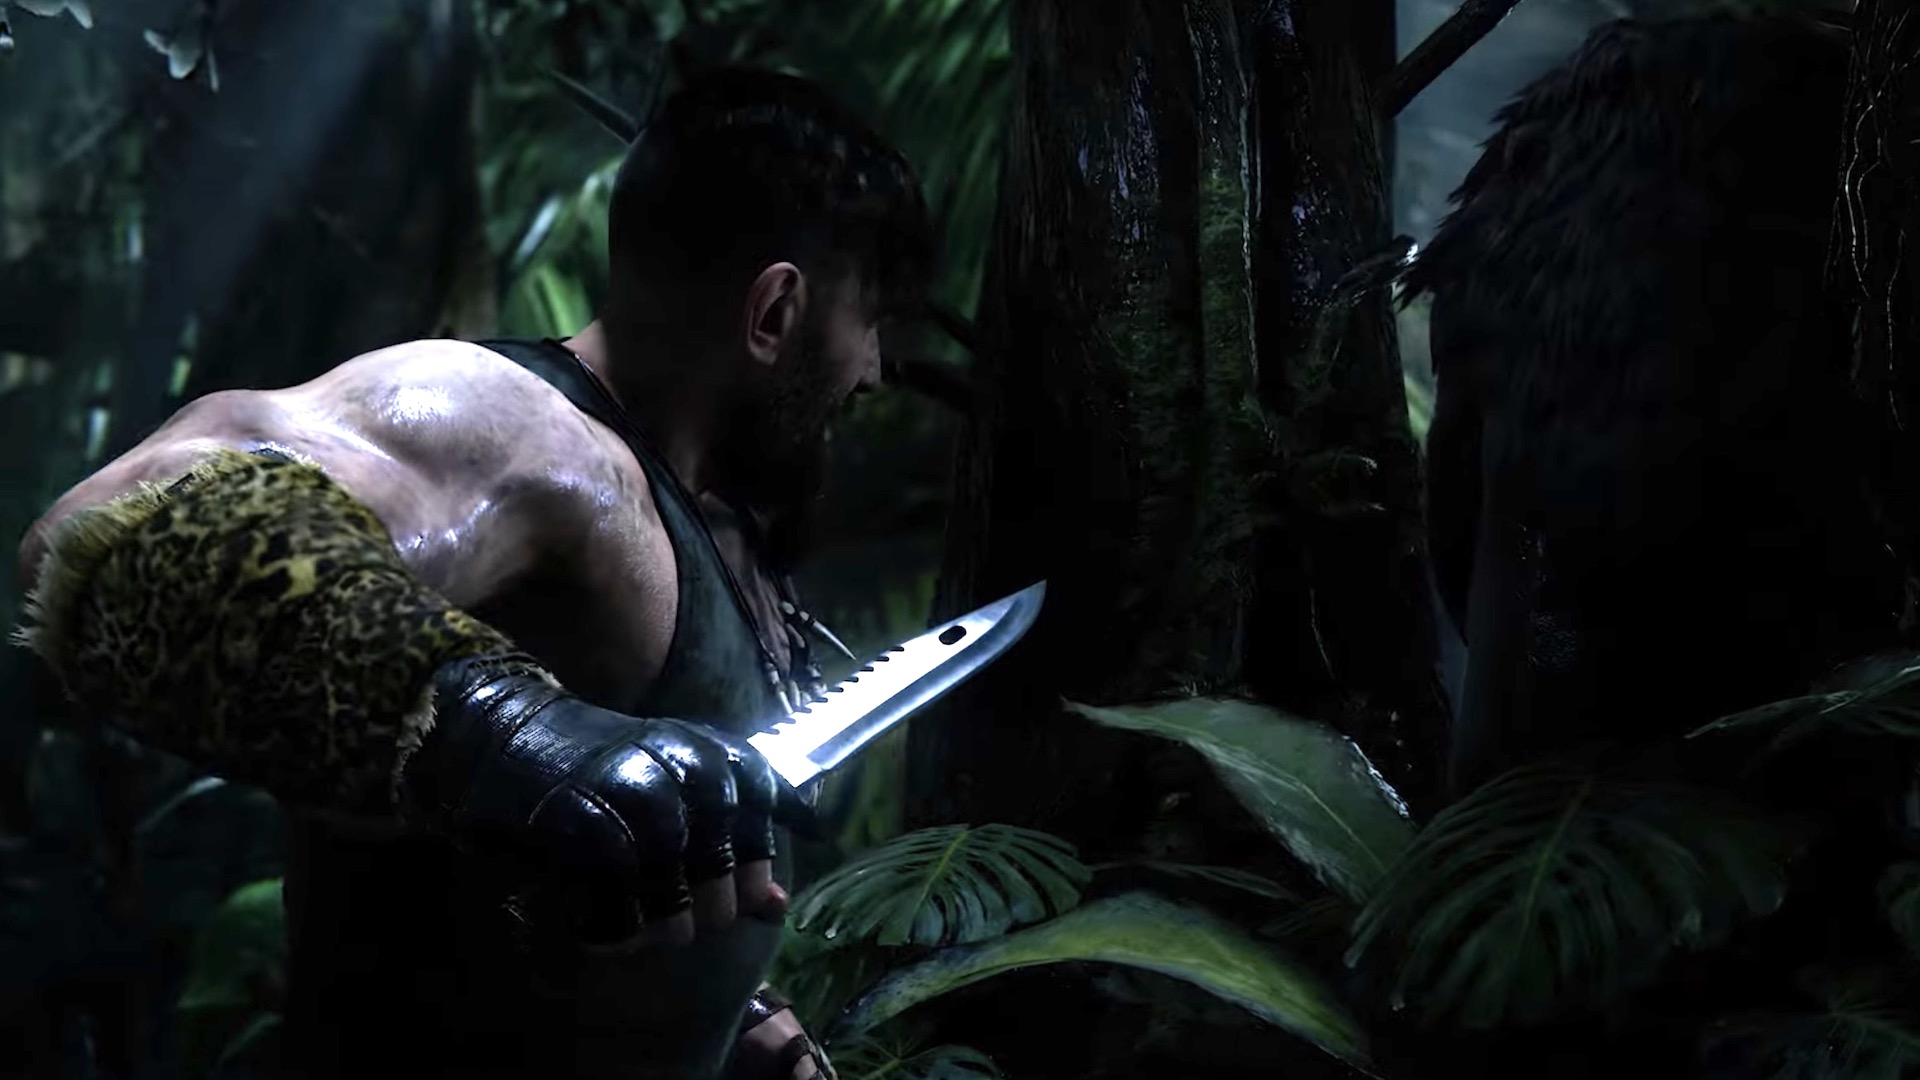 Kraven holds a blade and walks slowly through the jungle, stalking his prey